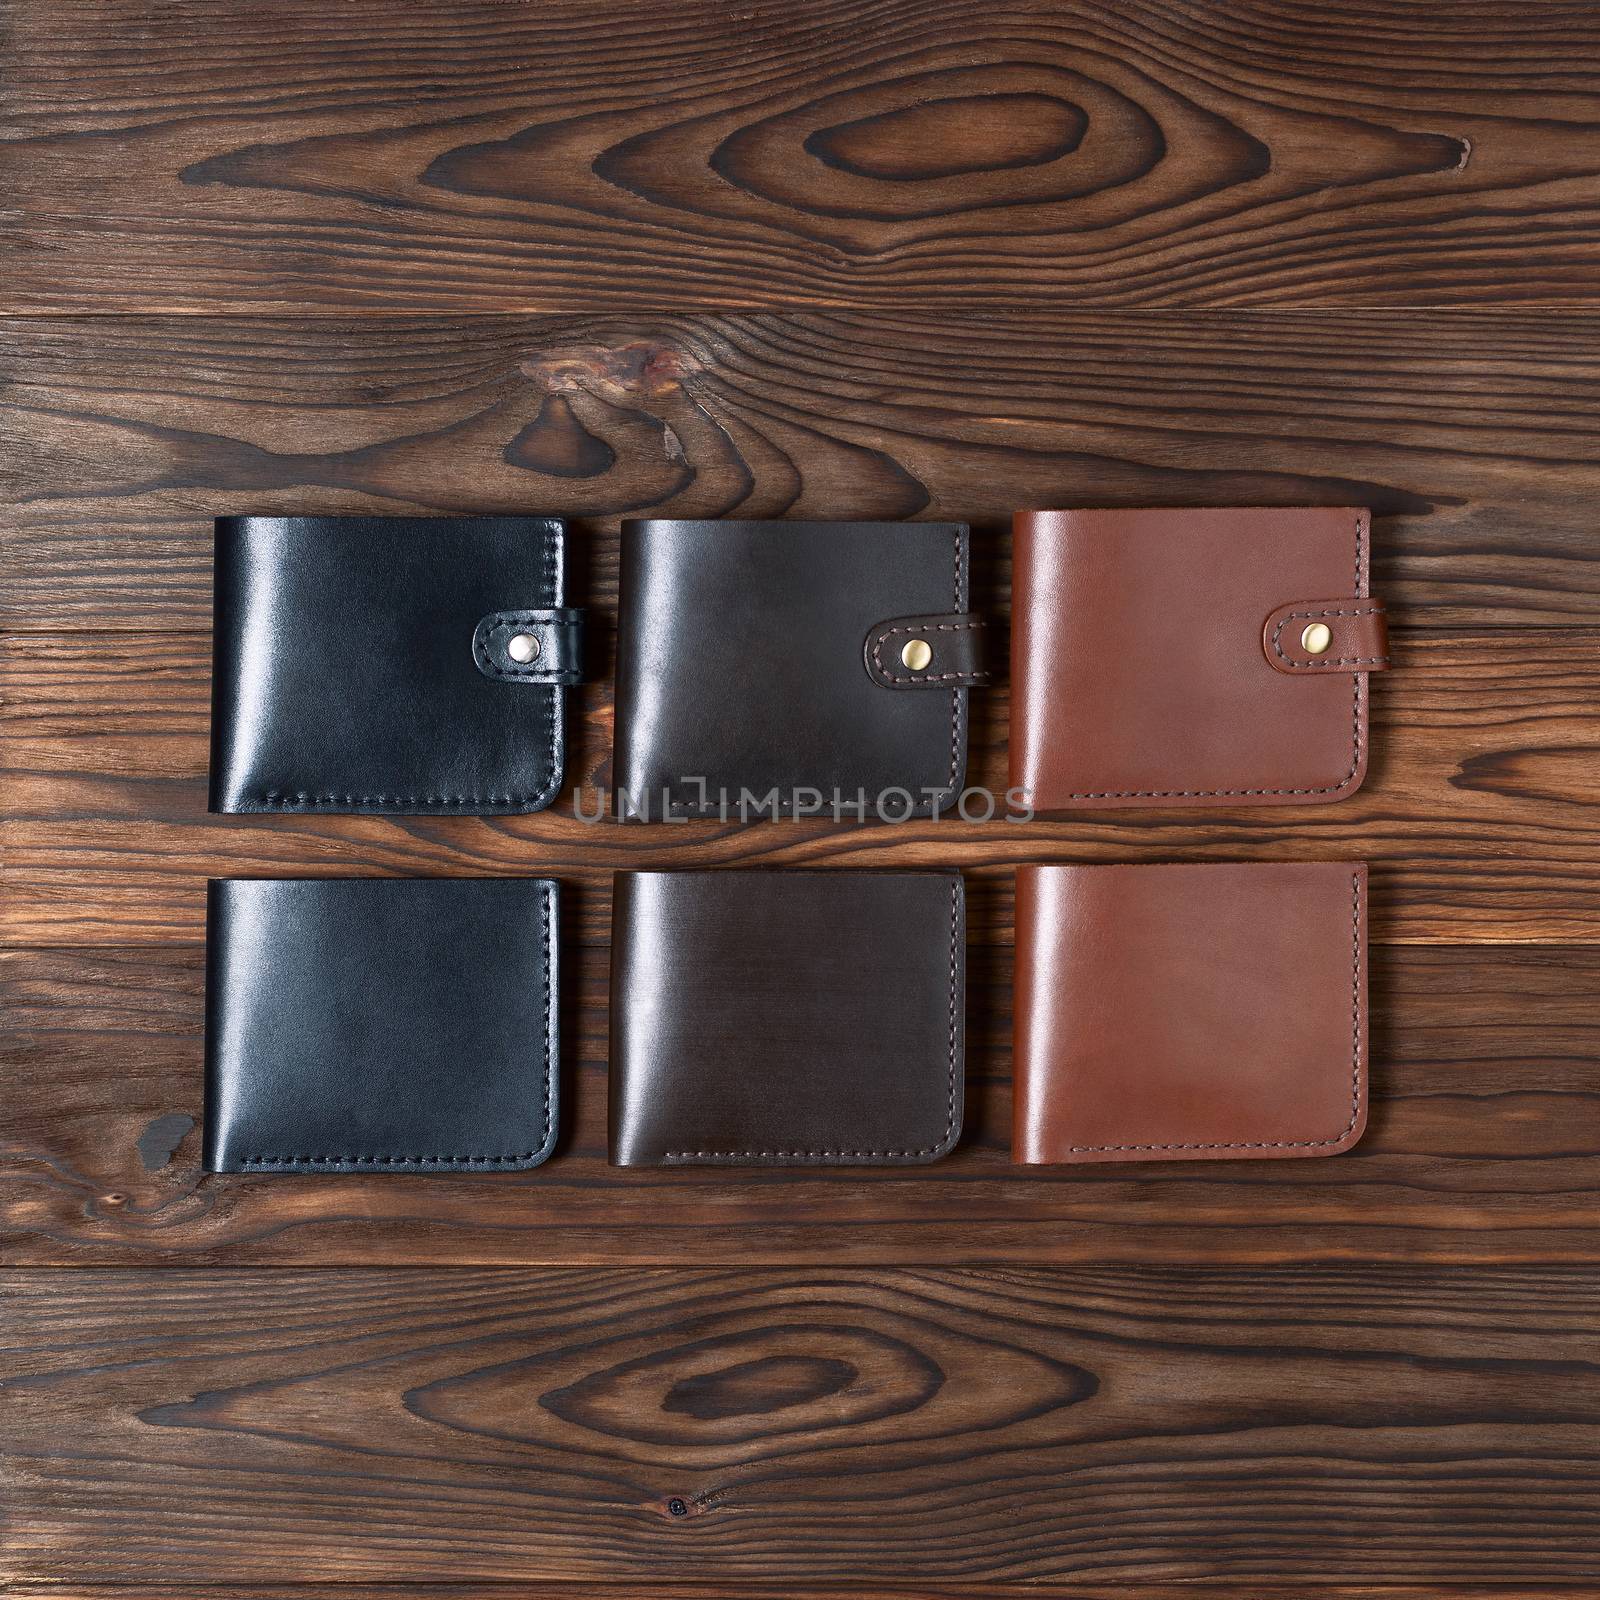 Six handmade leather wallets on wooden textured background. Up to down view. Wallet stock photo.